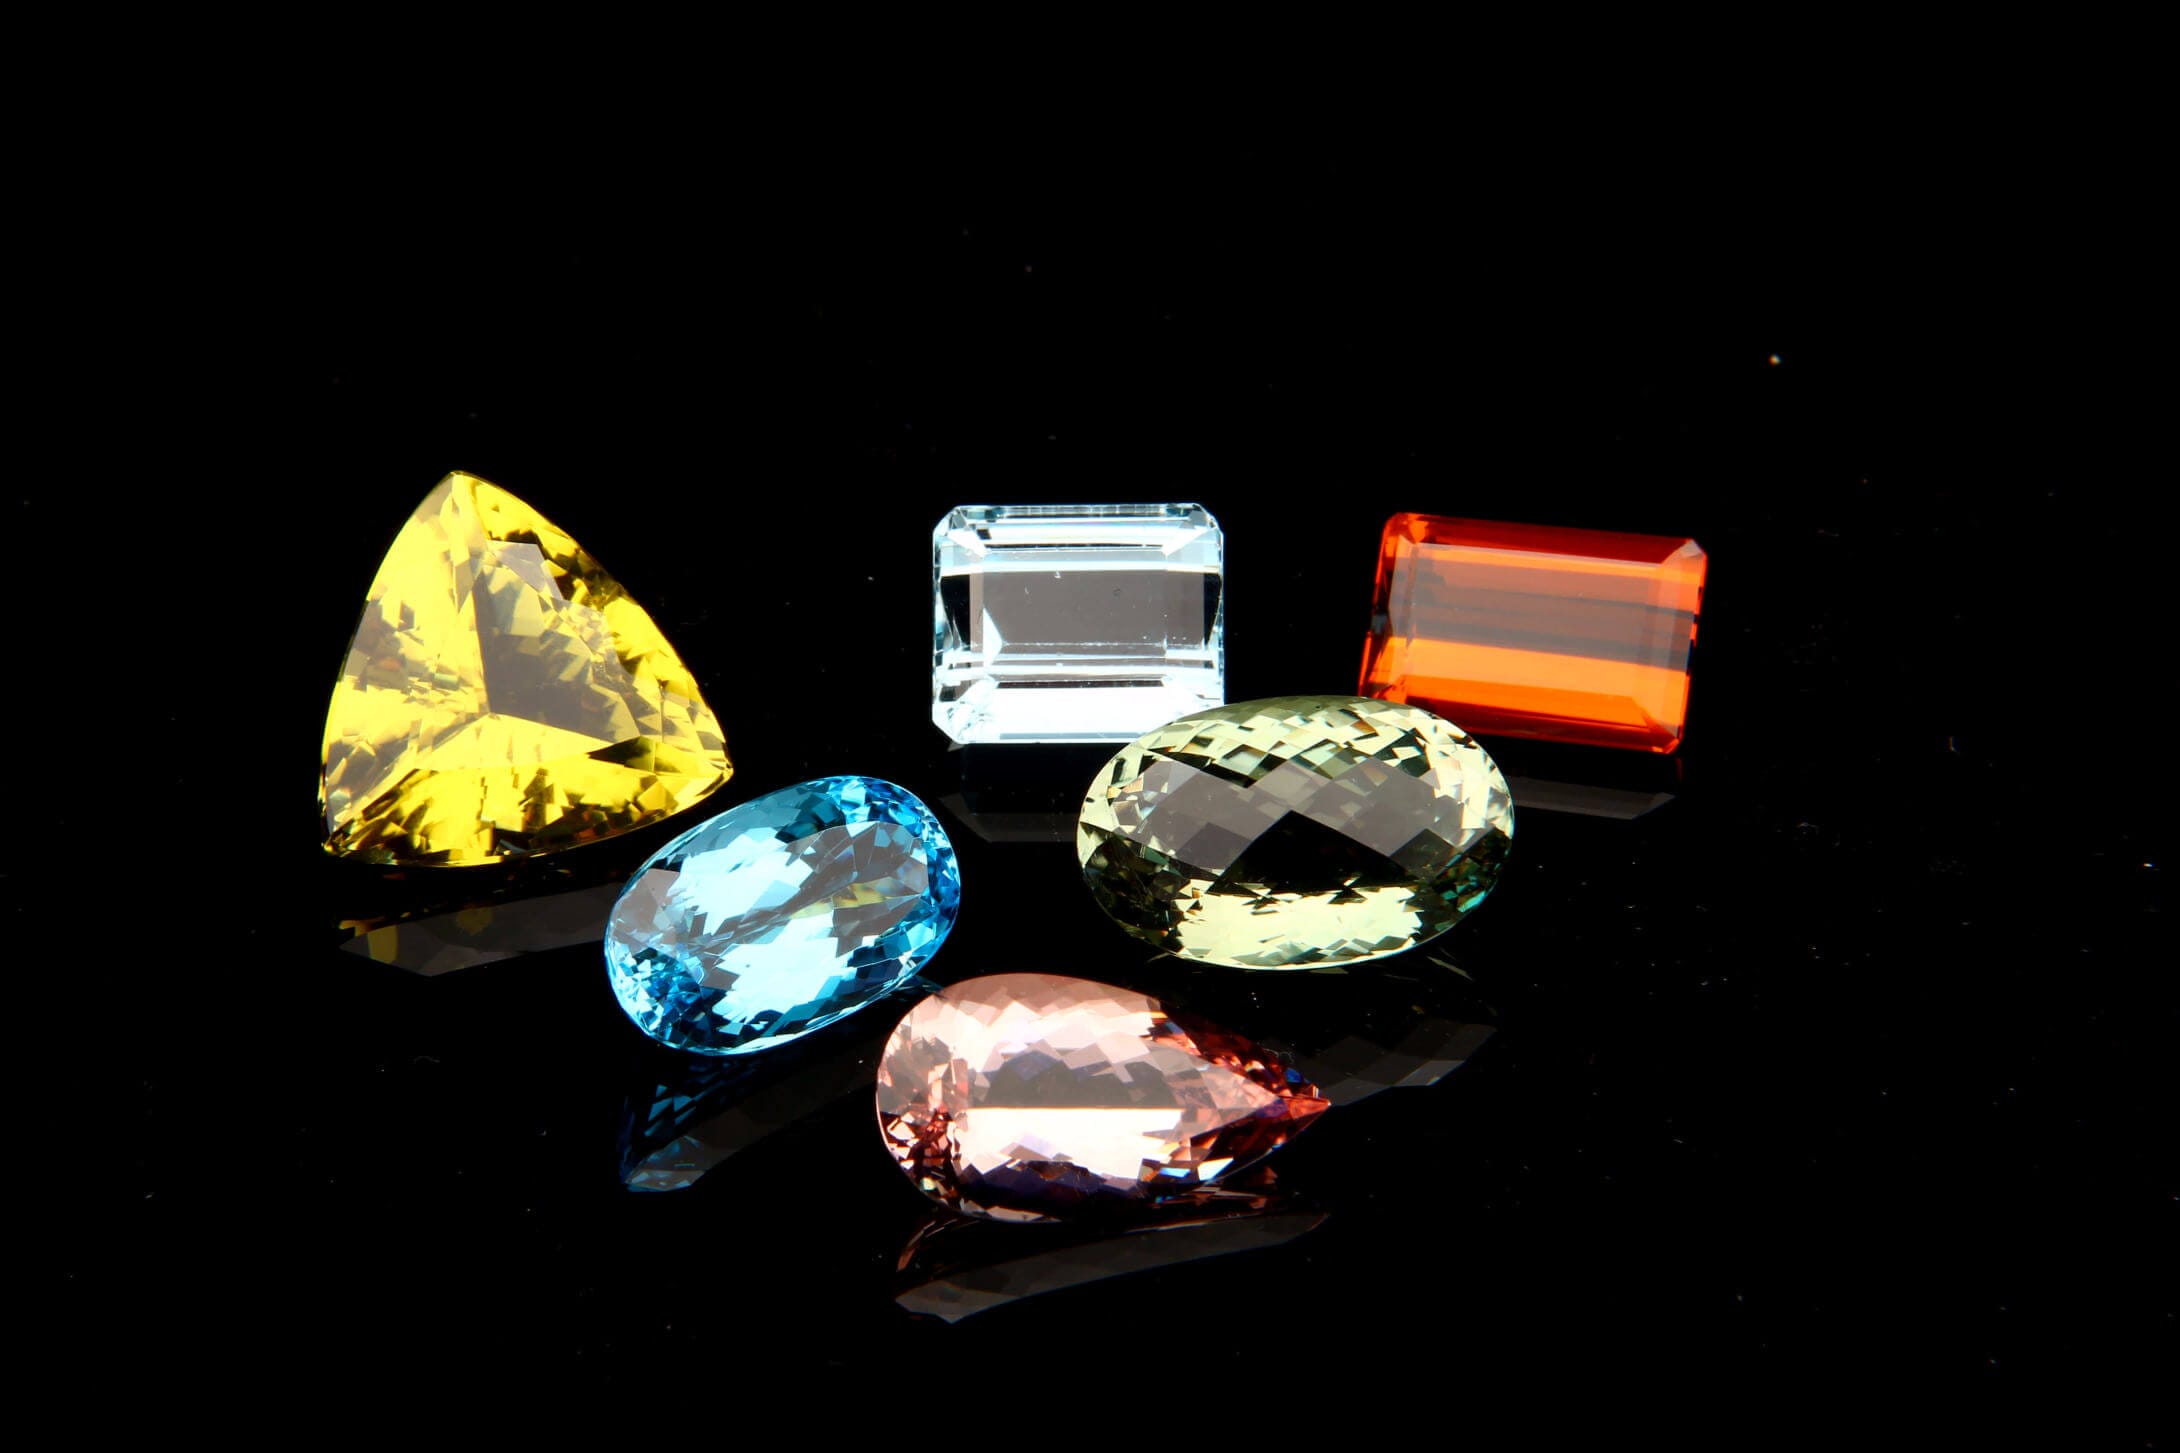 Gems (Gemstone): Meaning, Types, Benefits, Uses, Properties, Jewelry -  Rudra Centre